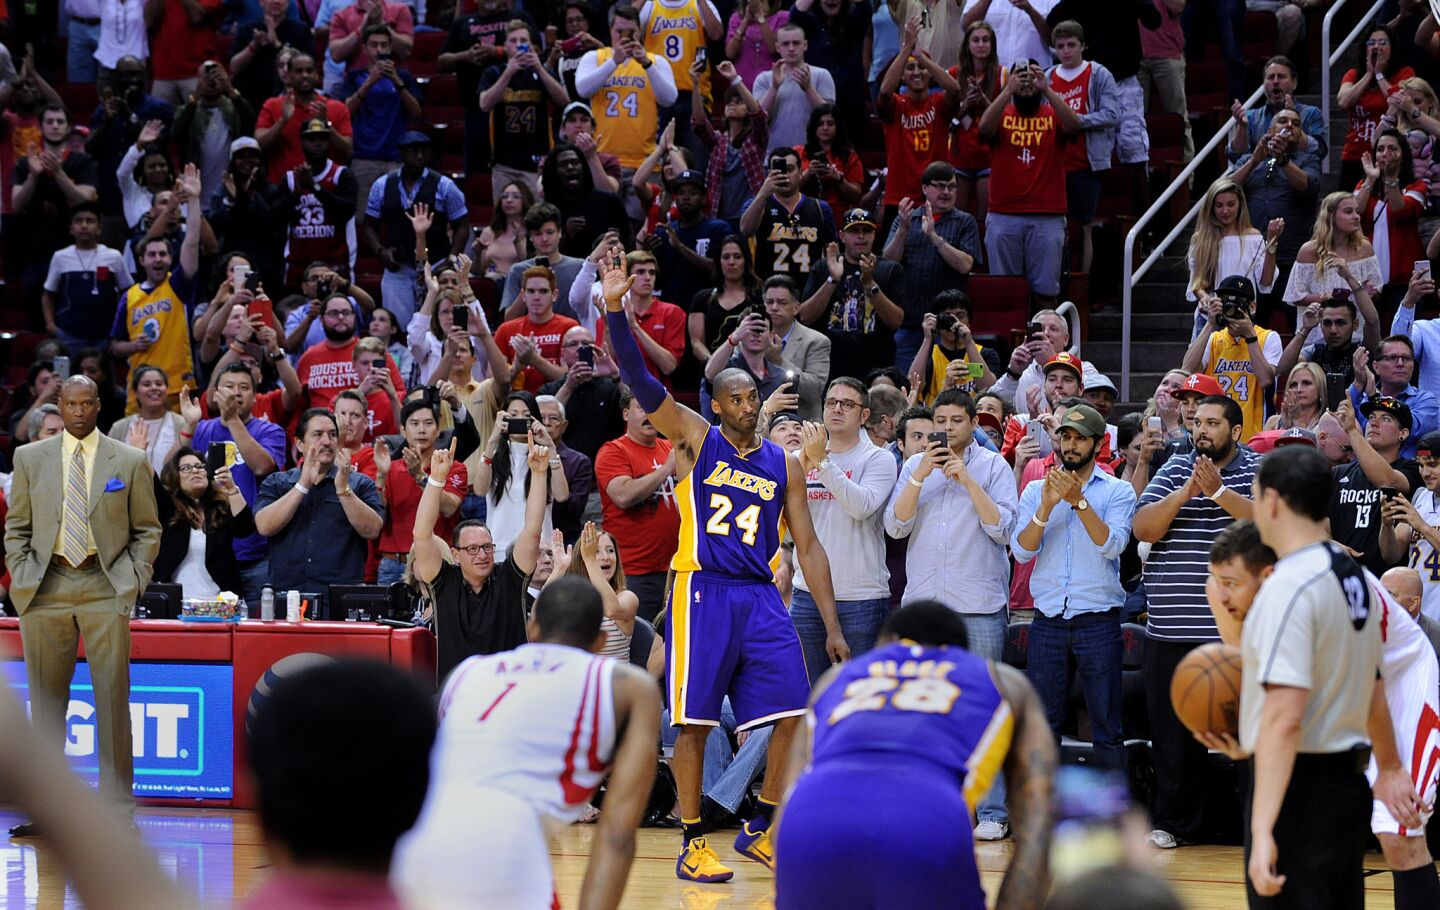 Kobe Bryant waves to the crowd as he leaves the court for the last time against the Rockets in Houston.